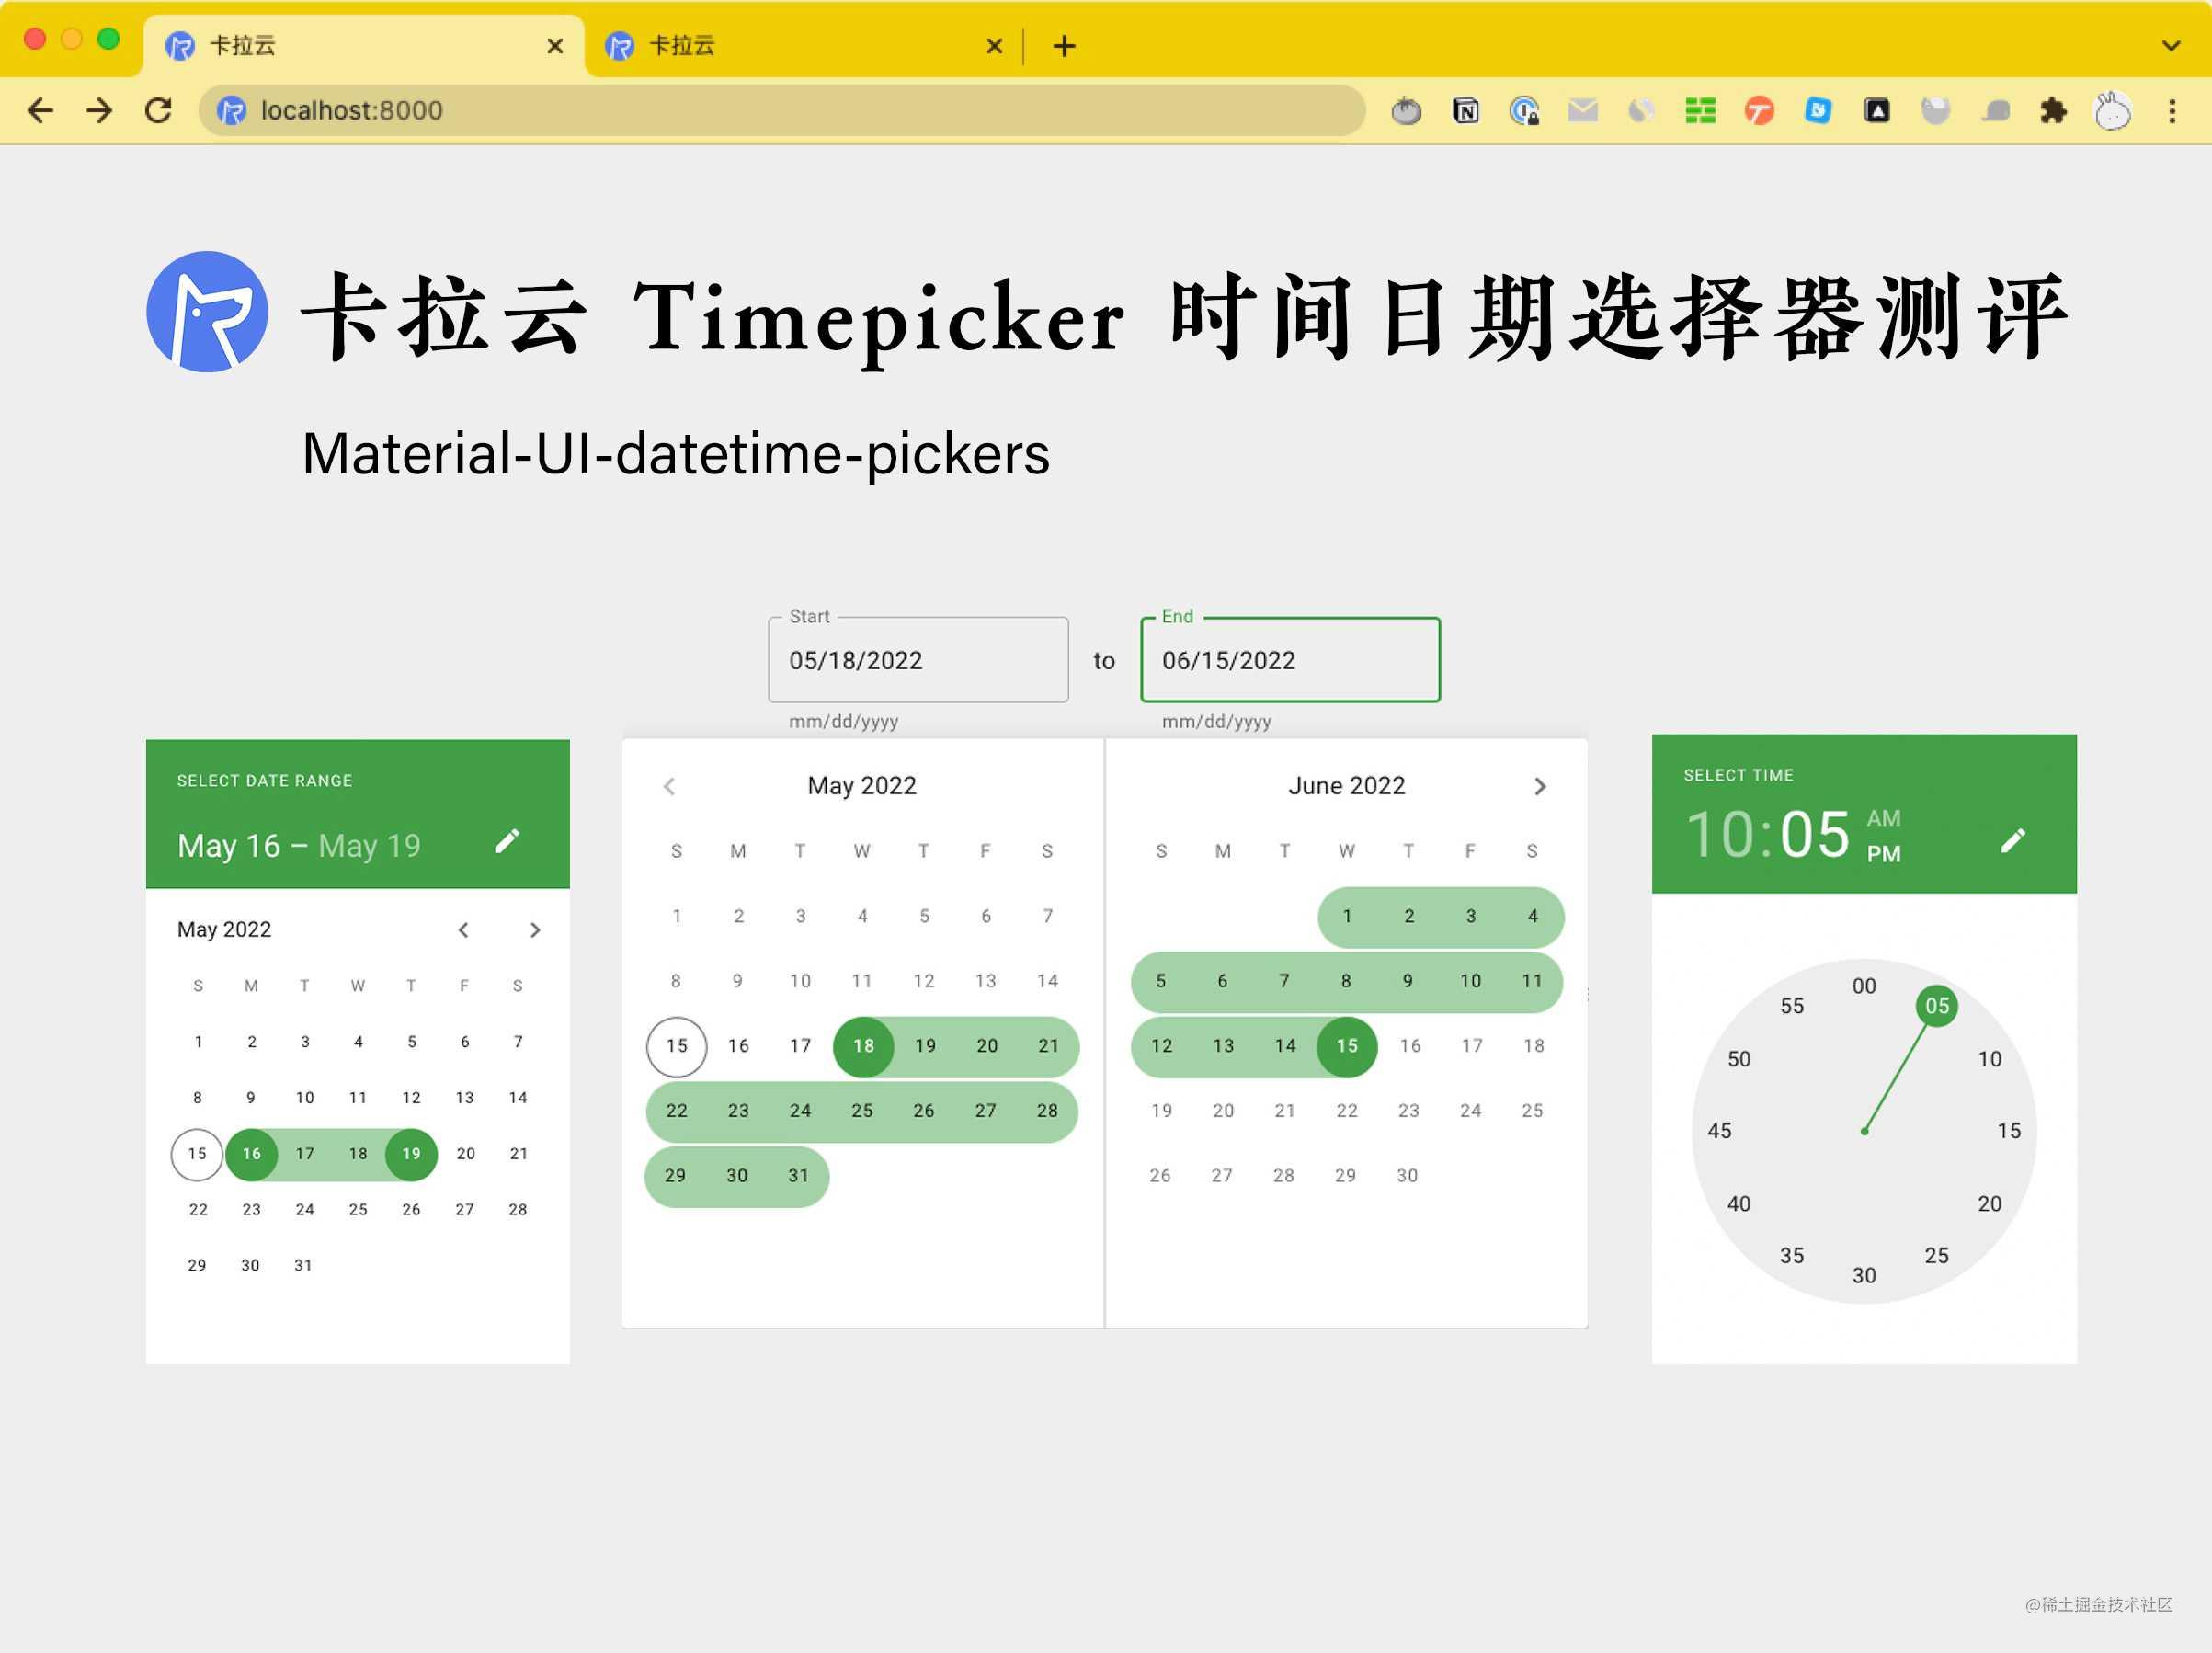 02-Material-UI-datetime-pickers